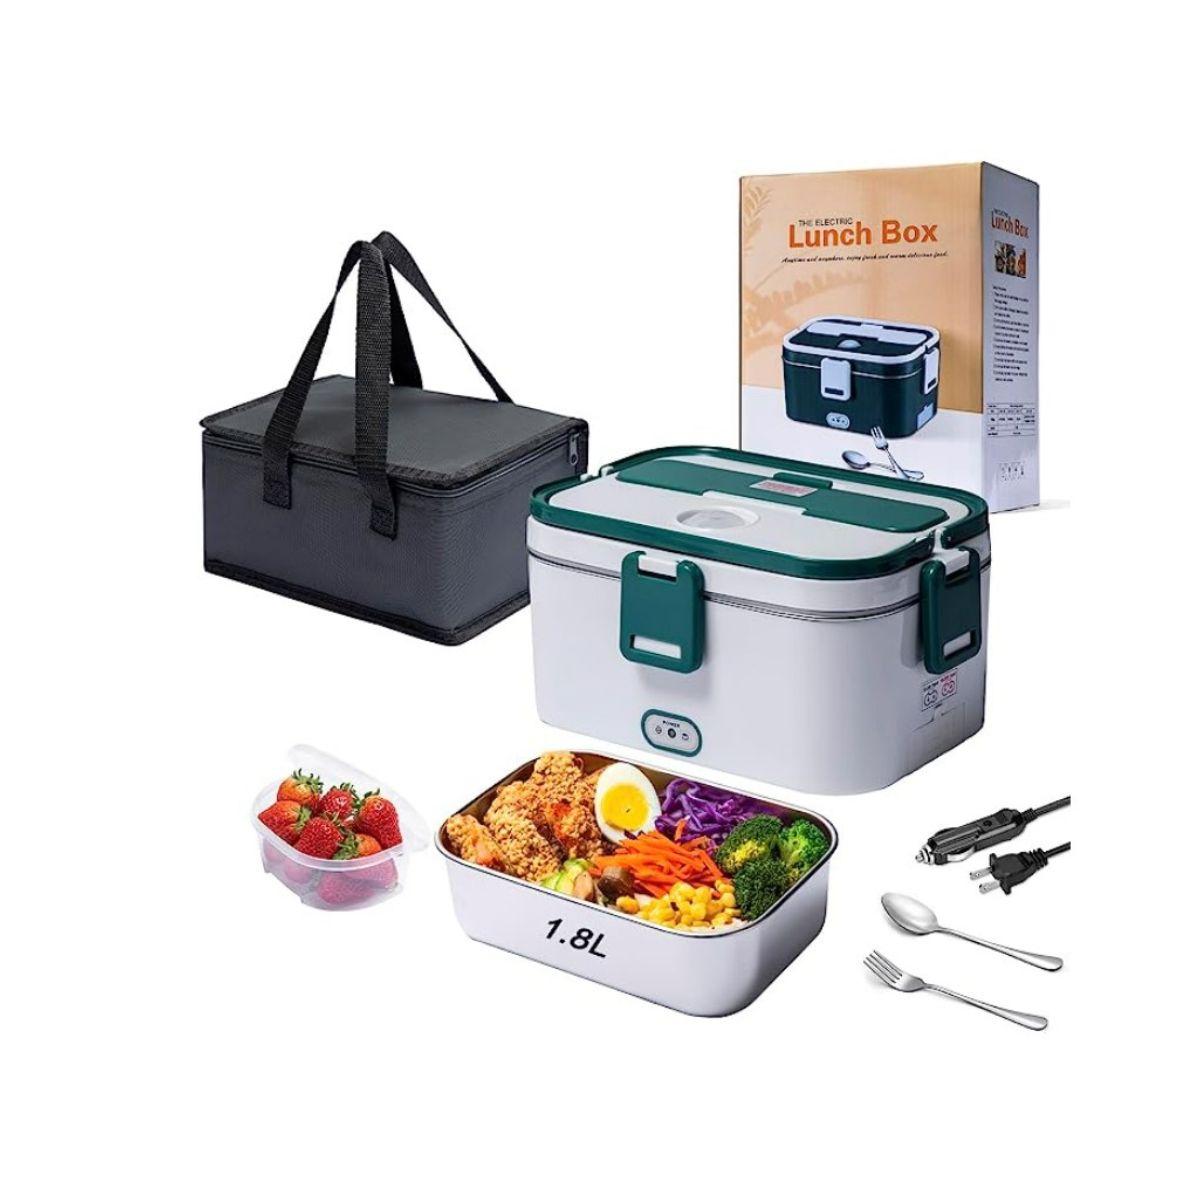 White electric lunch box with green clasps and handles. Hot food in stainless steel tray and strawberries in fruit compartment.